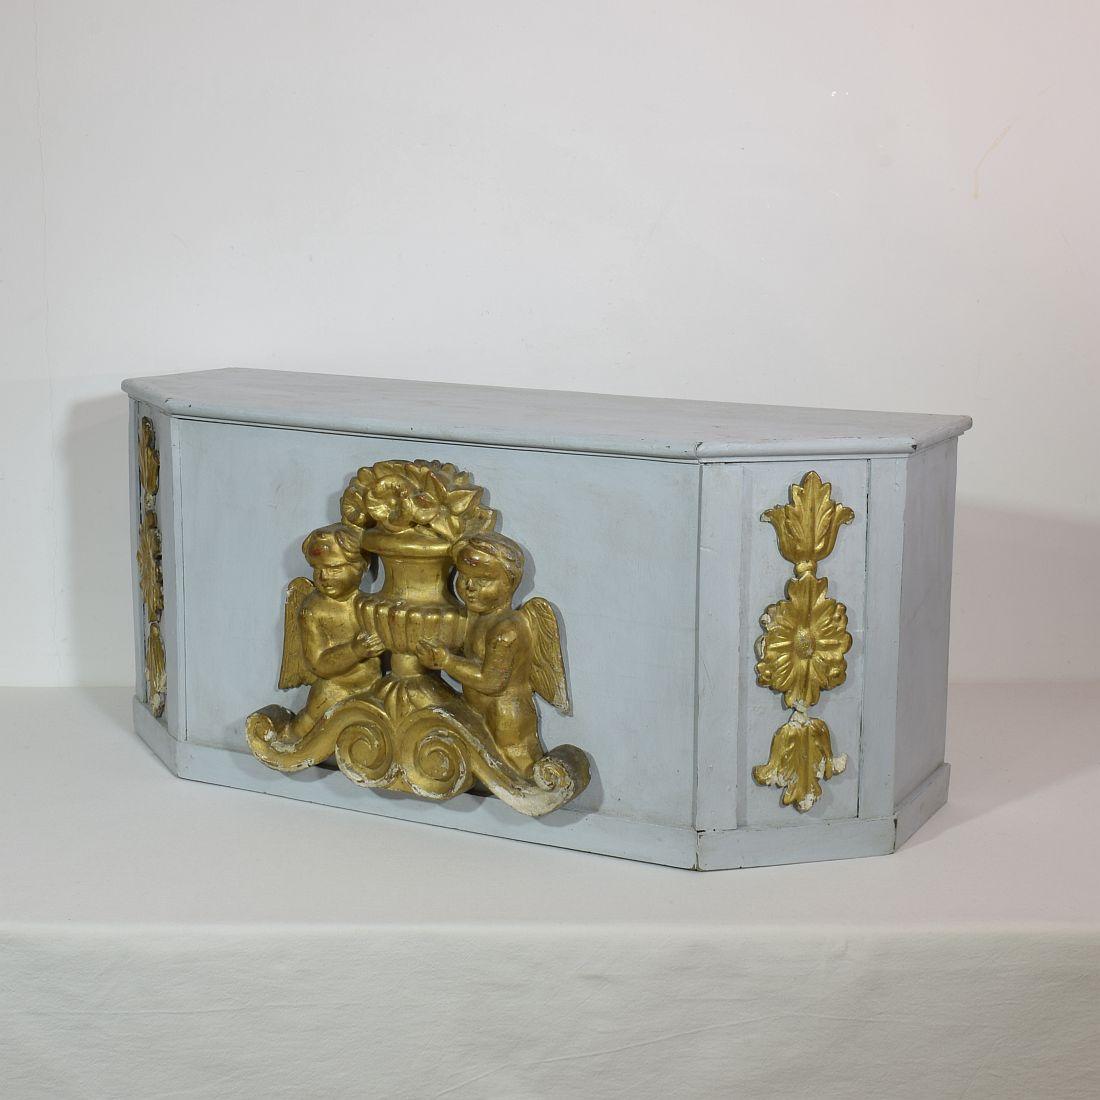 Hand-Carved 18th Century Italian Neoclassical Carved Wooden Altar For Sale